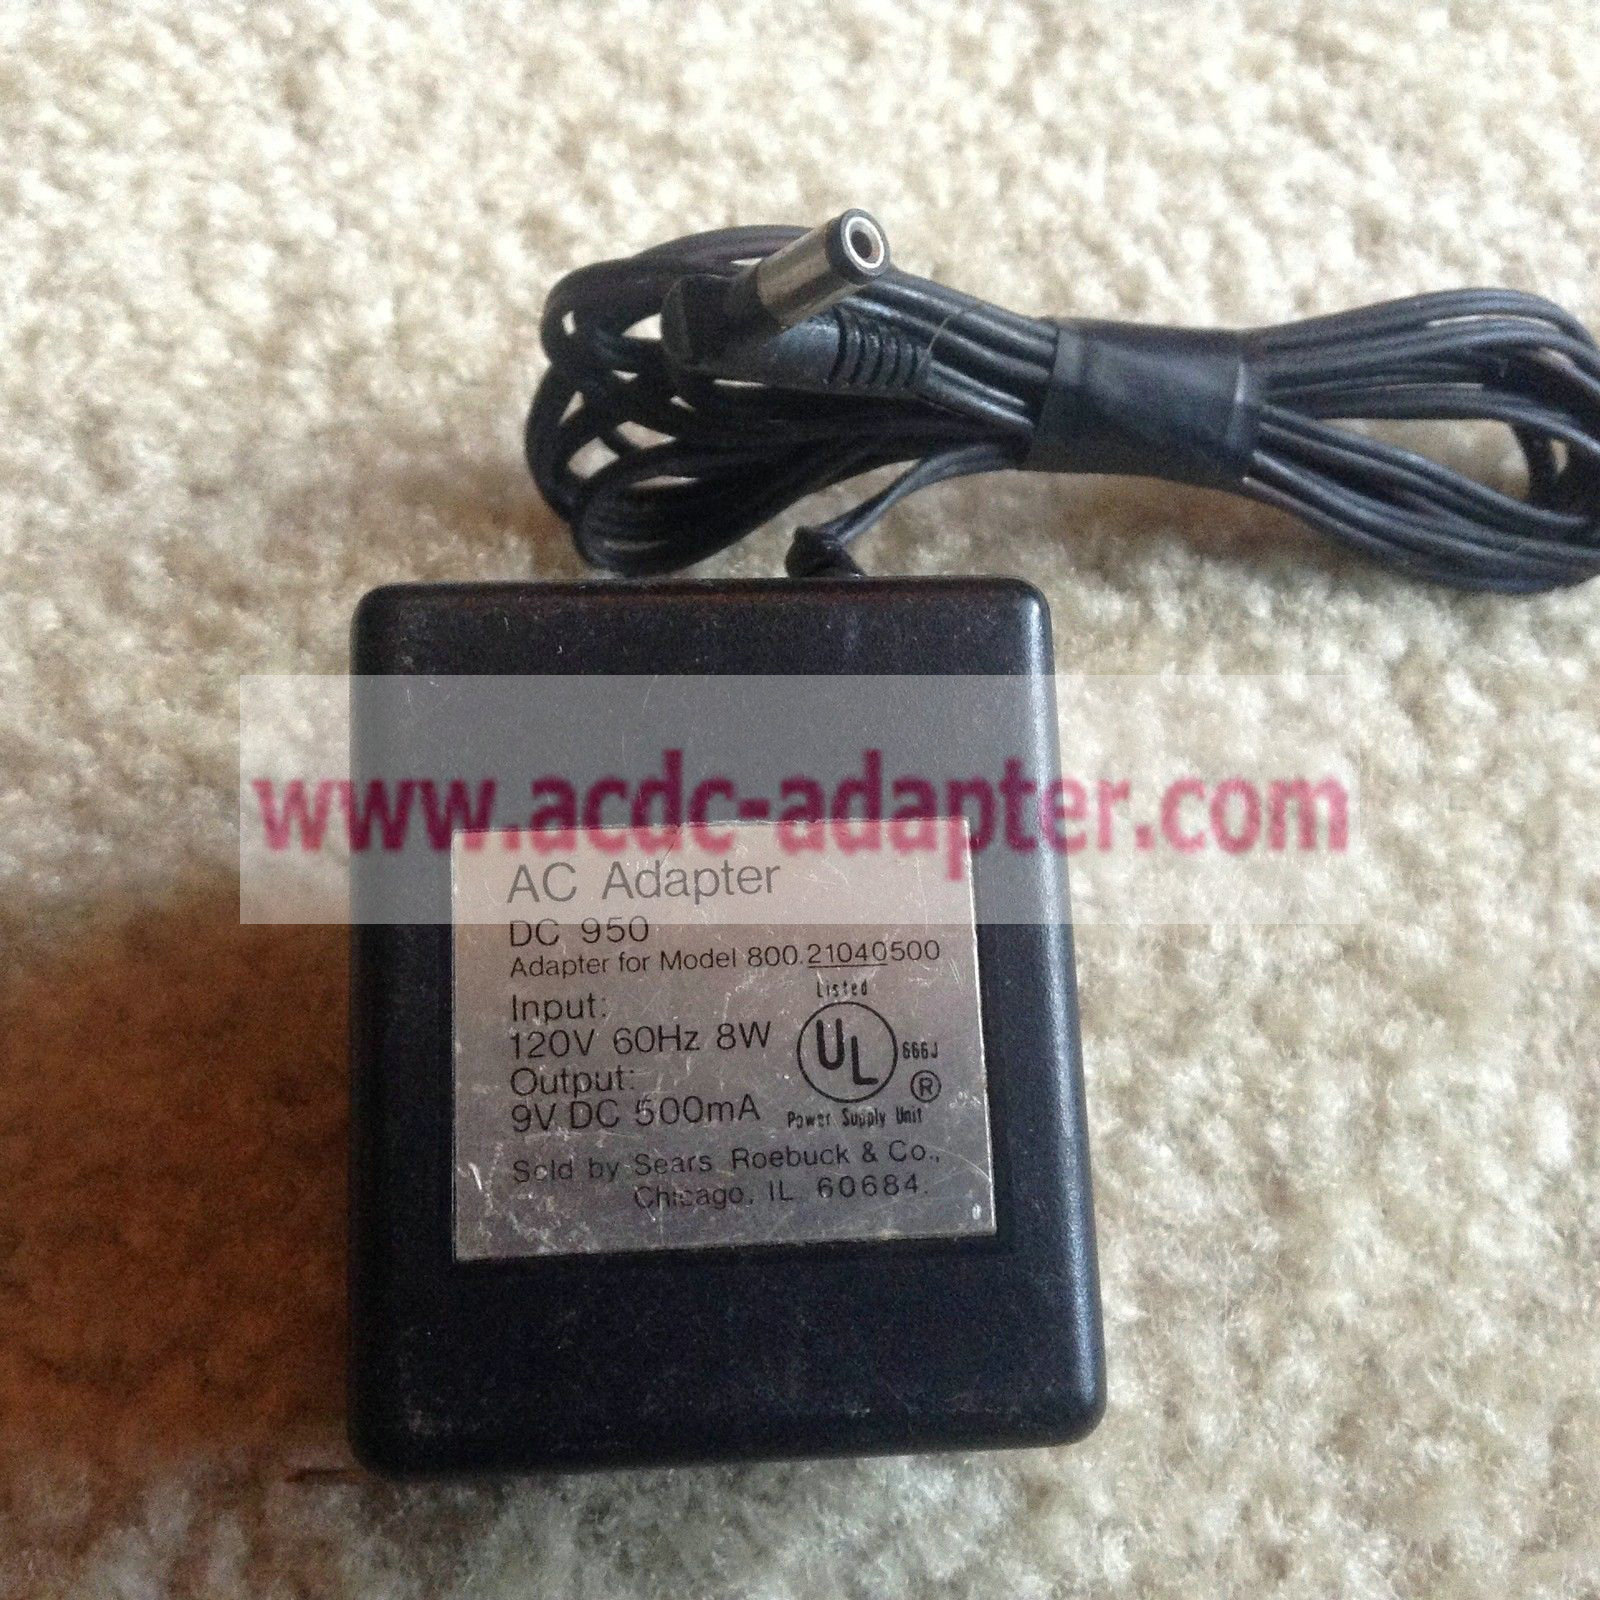 NEW SEARS 9V 500mA DC 950/21040500 AC/DC WALL WART POWER SUPPLY ADAPTER CORD